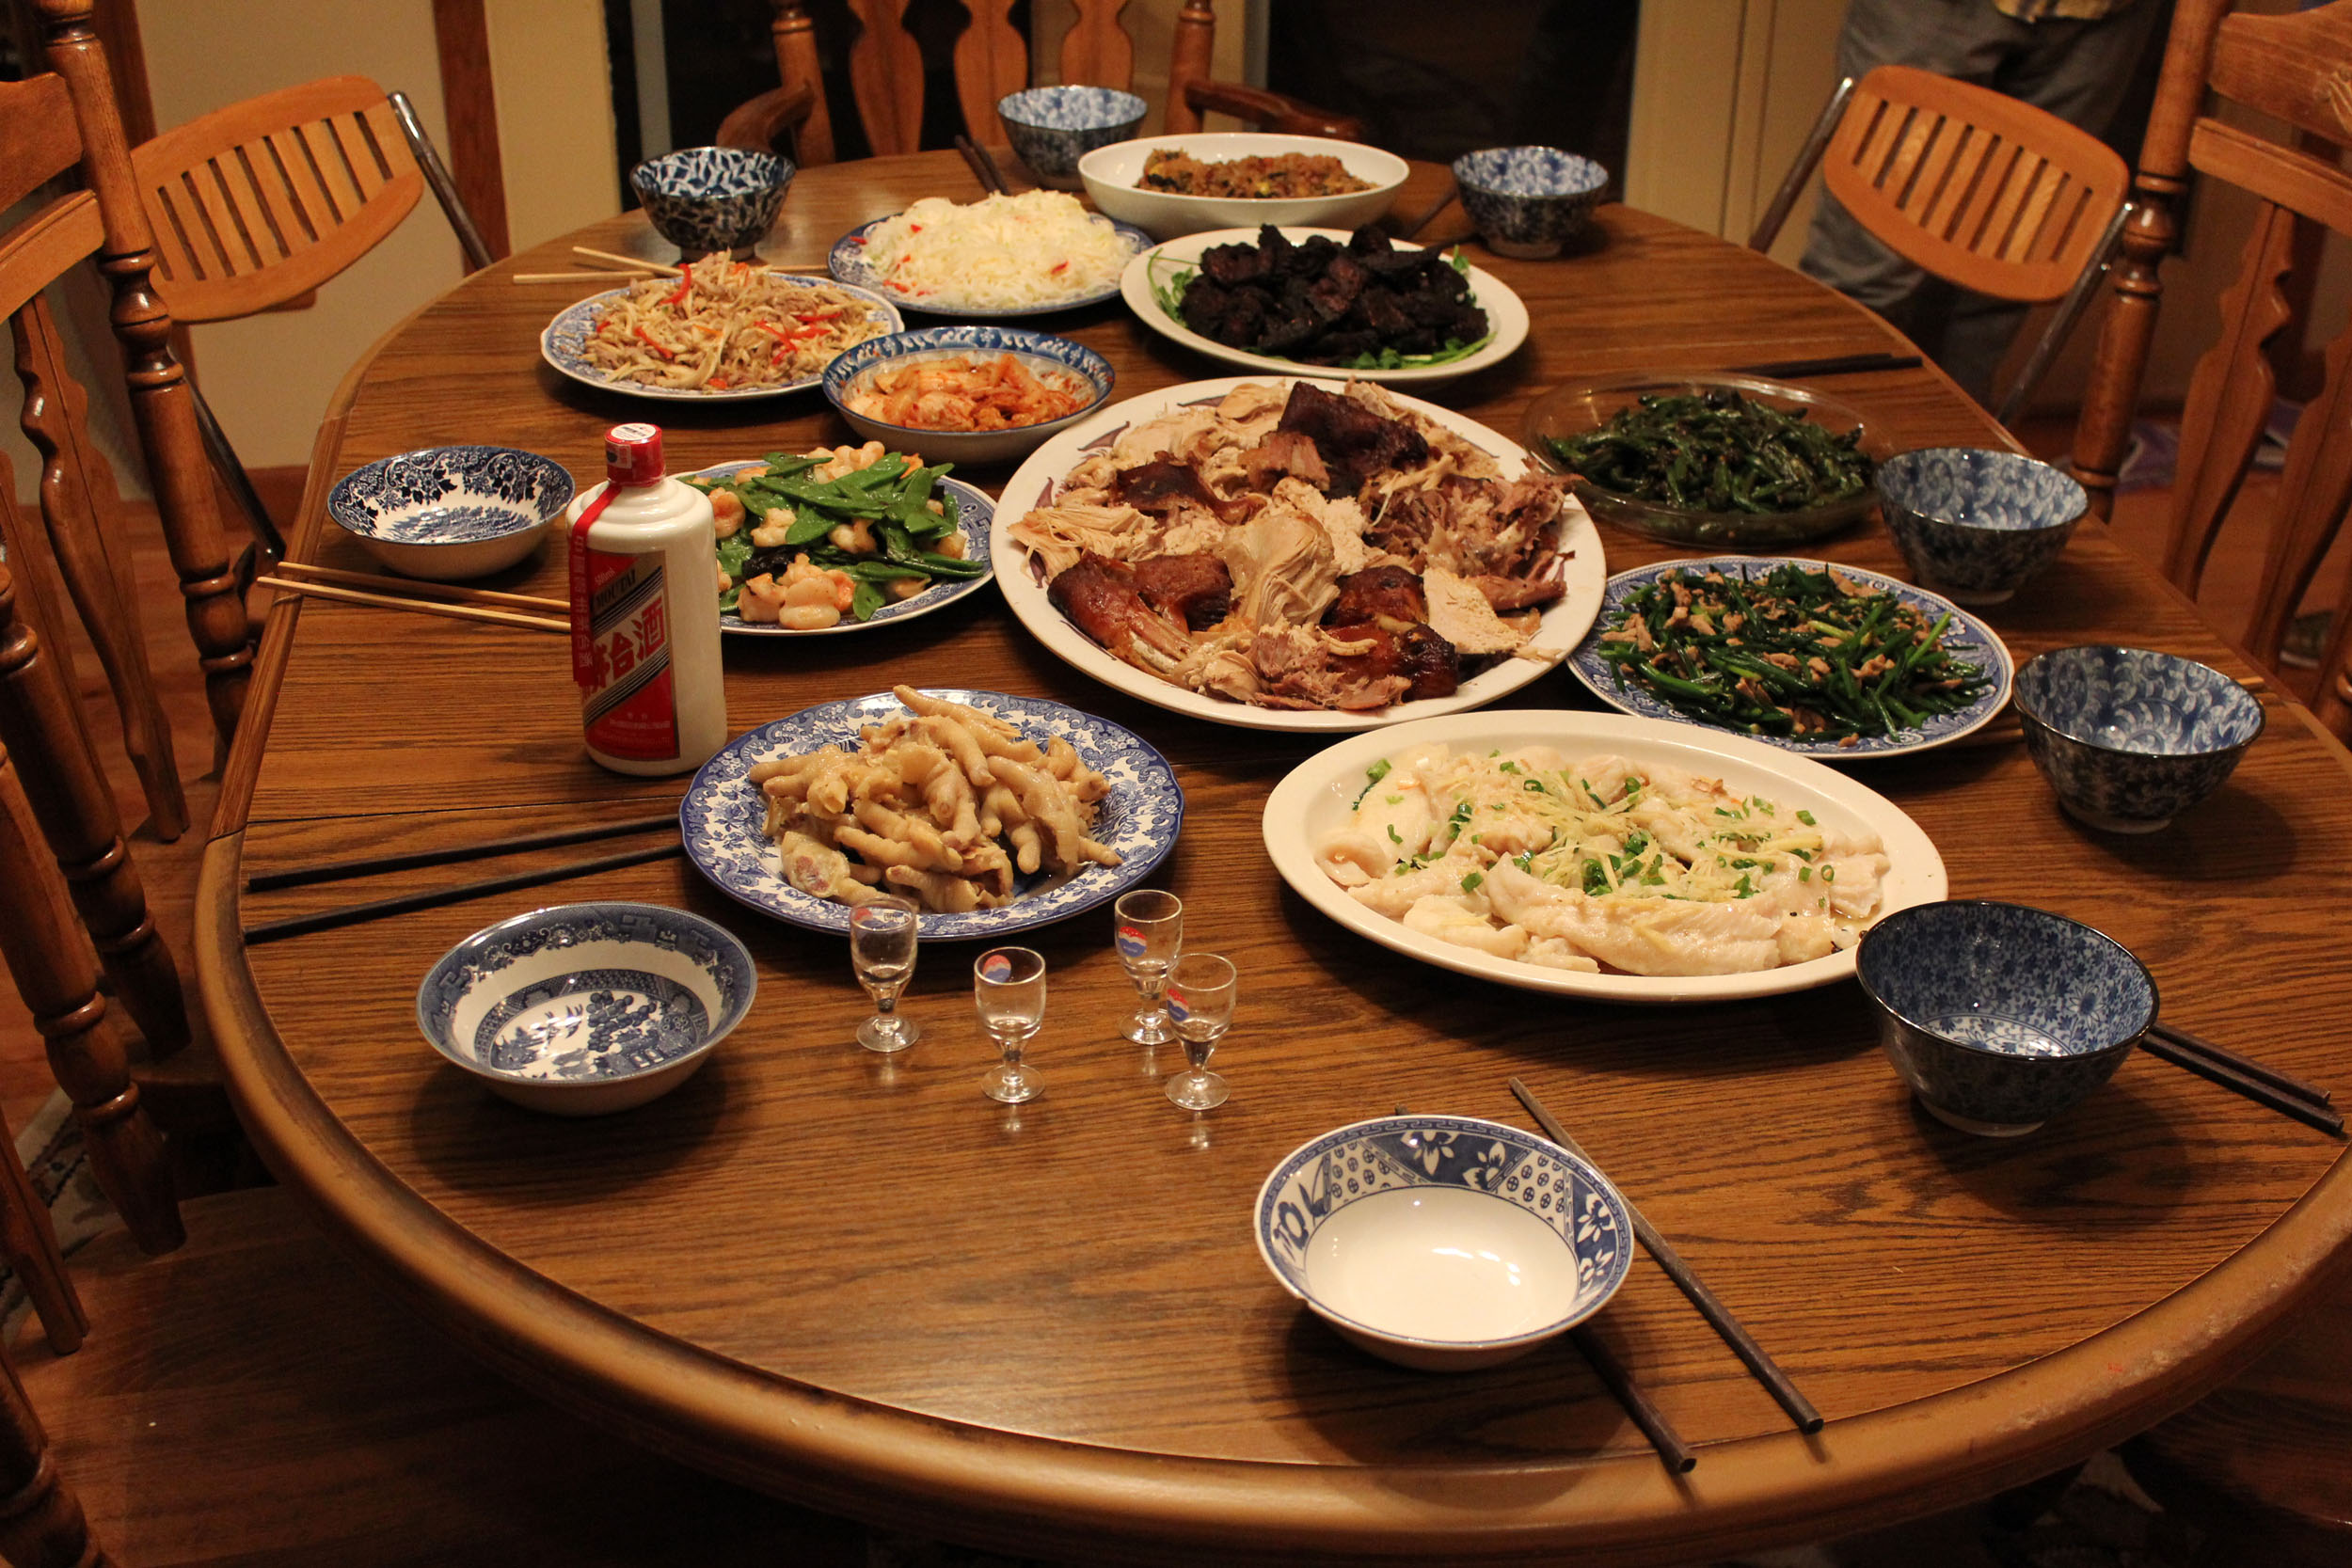 Chinese Thanksgiving Feast image - Free stock photo ...